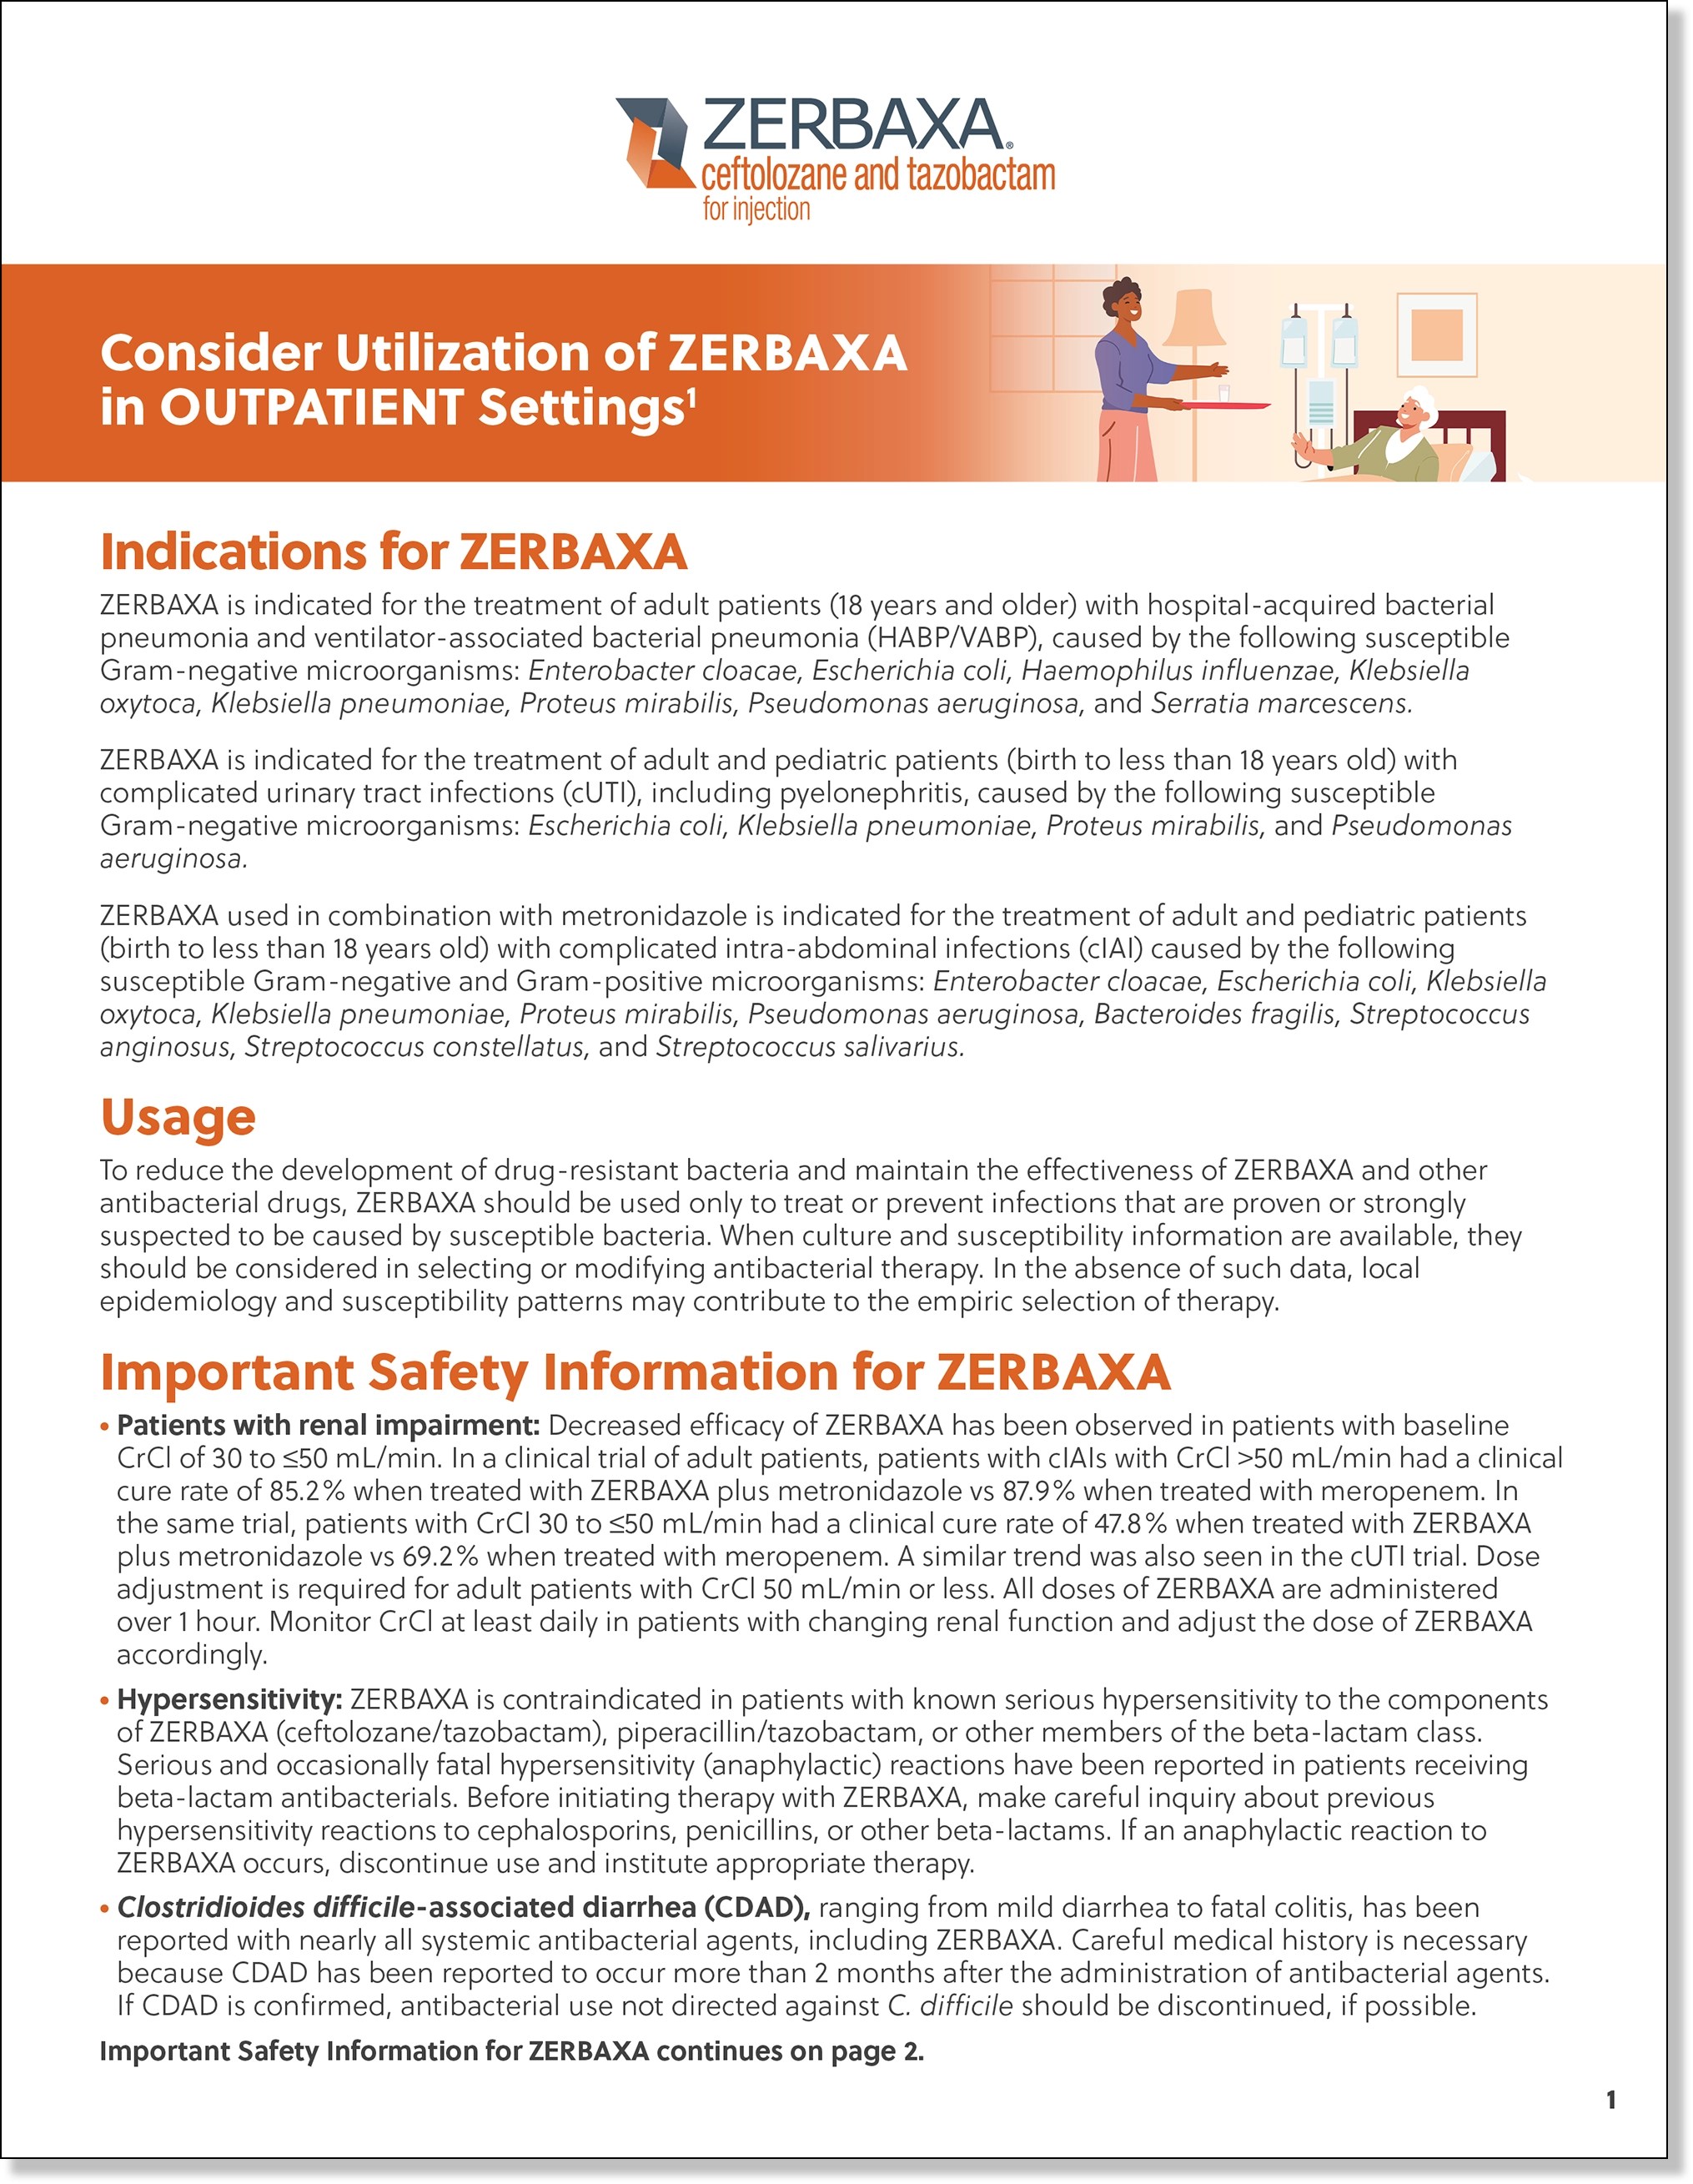 Outpatient Leave-Behind for Information About ZERBAXA® (ceftolozane and tazobactam)